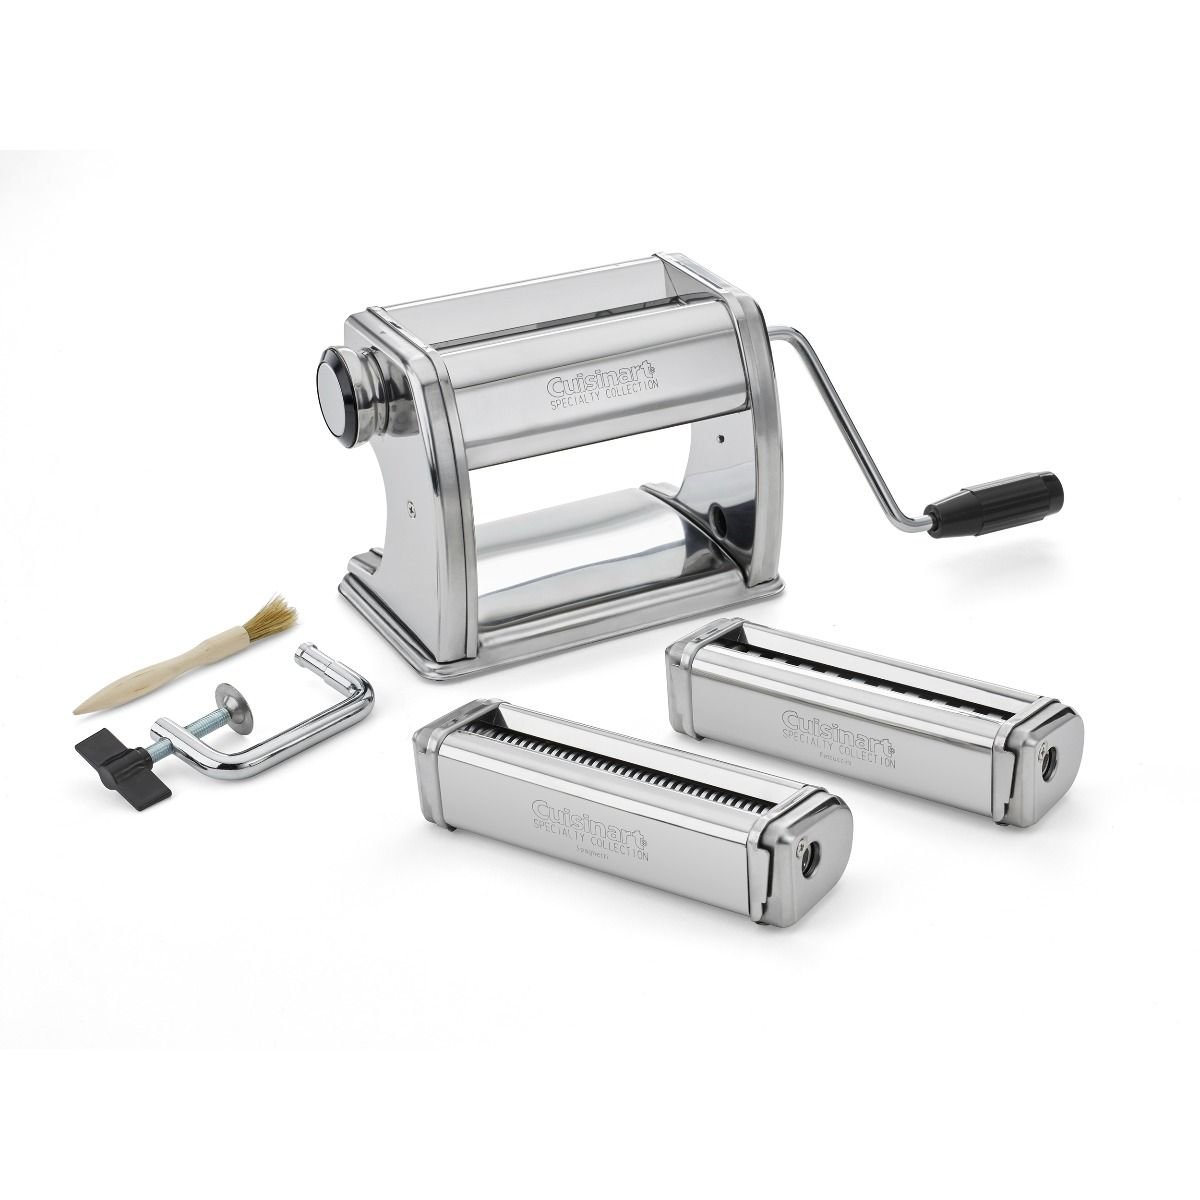 Stainless Steel Manual Pasta Maker Machine - My Charity Boxes